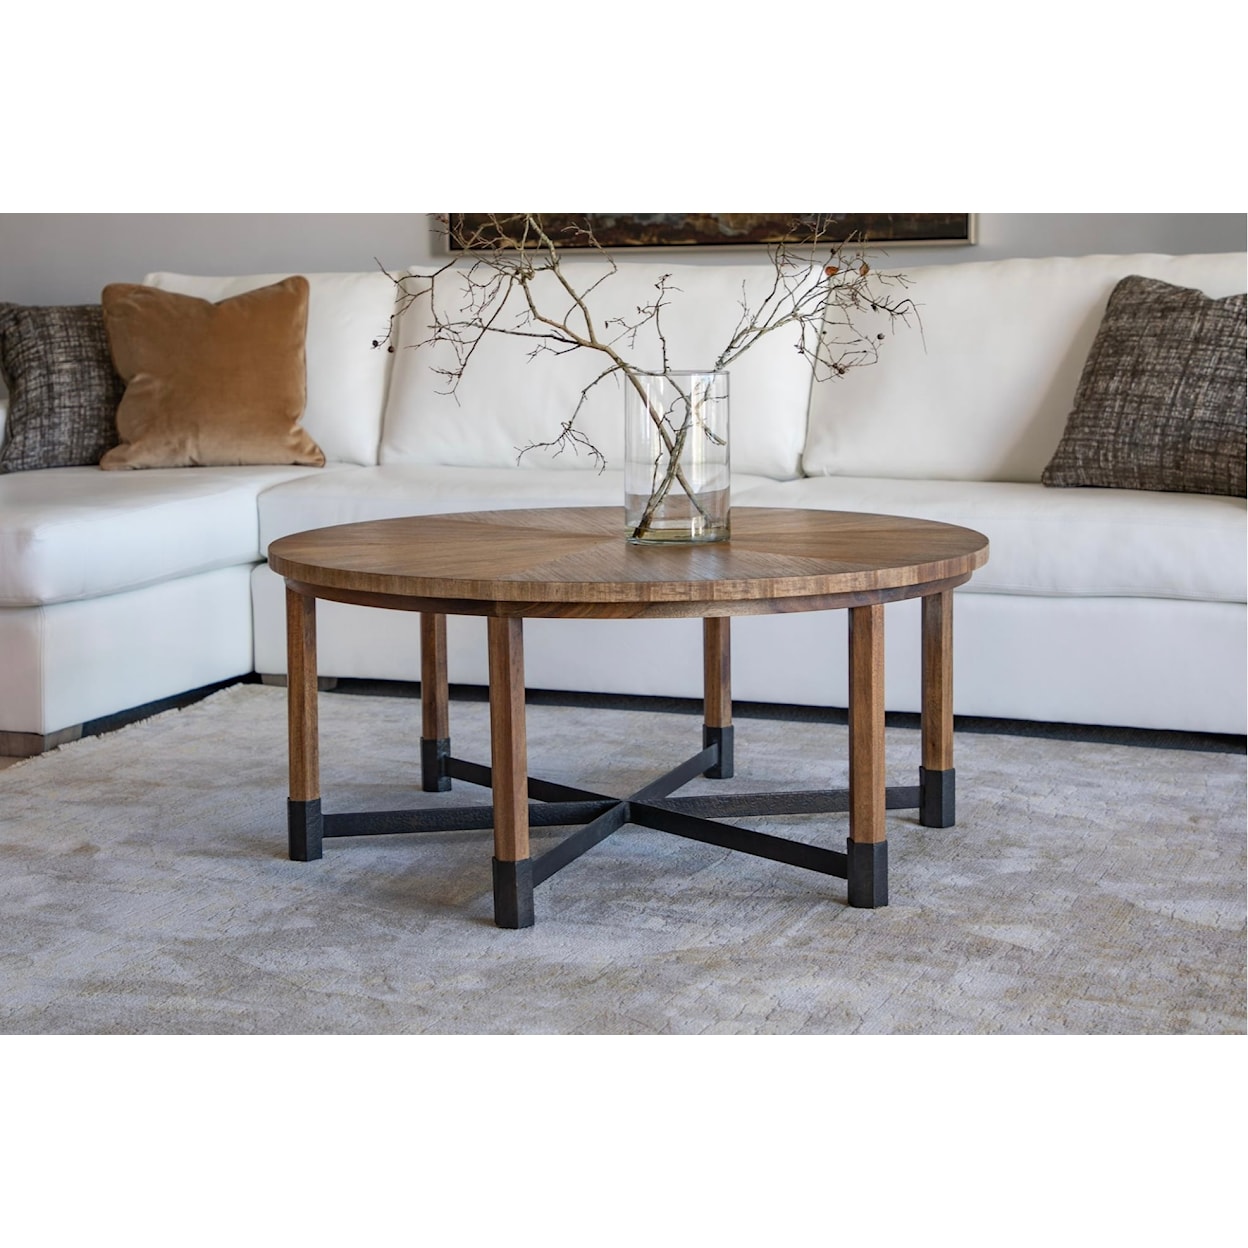 Oliver Home Furnishings Coffee Tables ROUND COFFEE TABLE- NATURAL